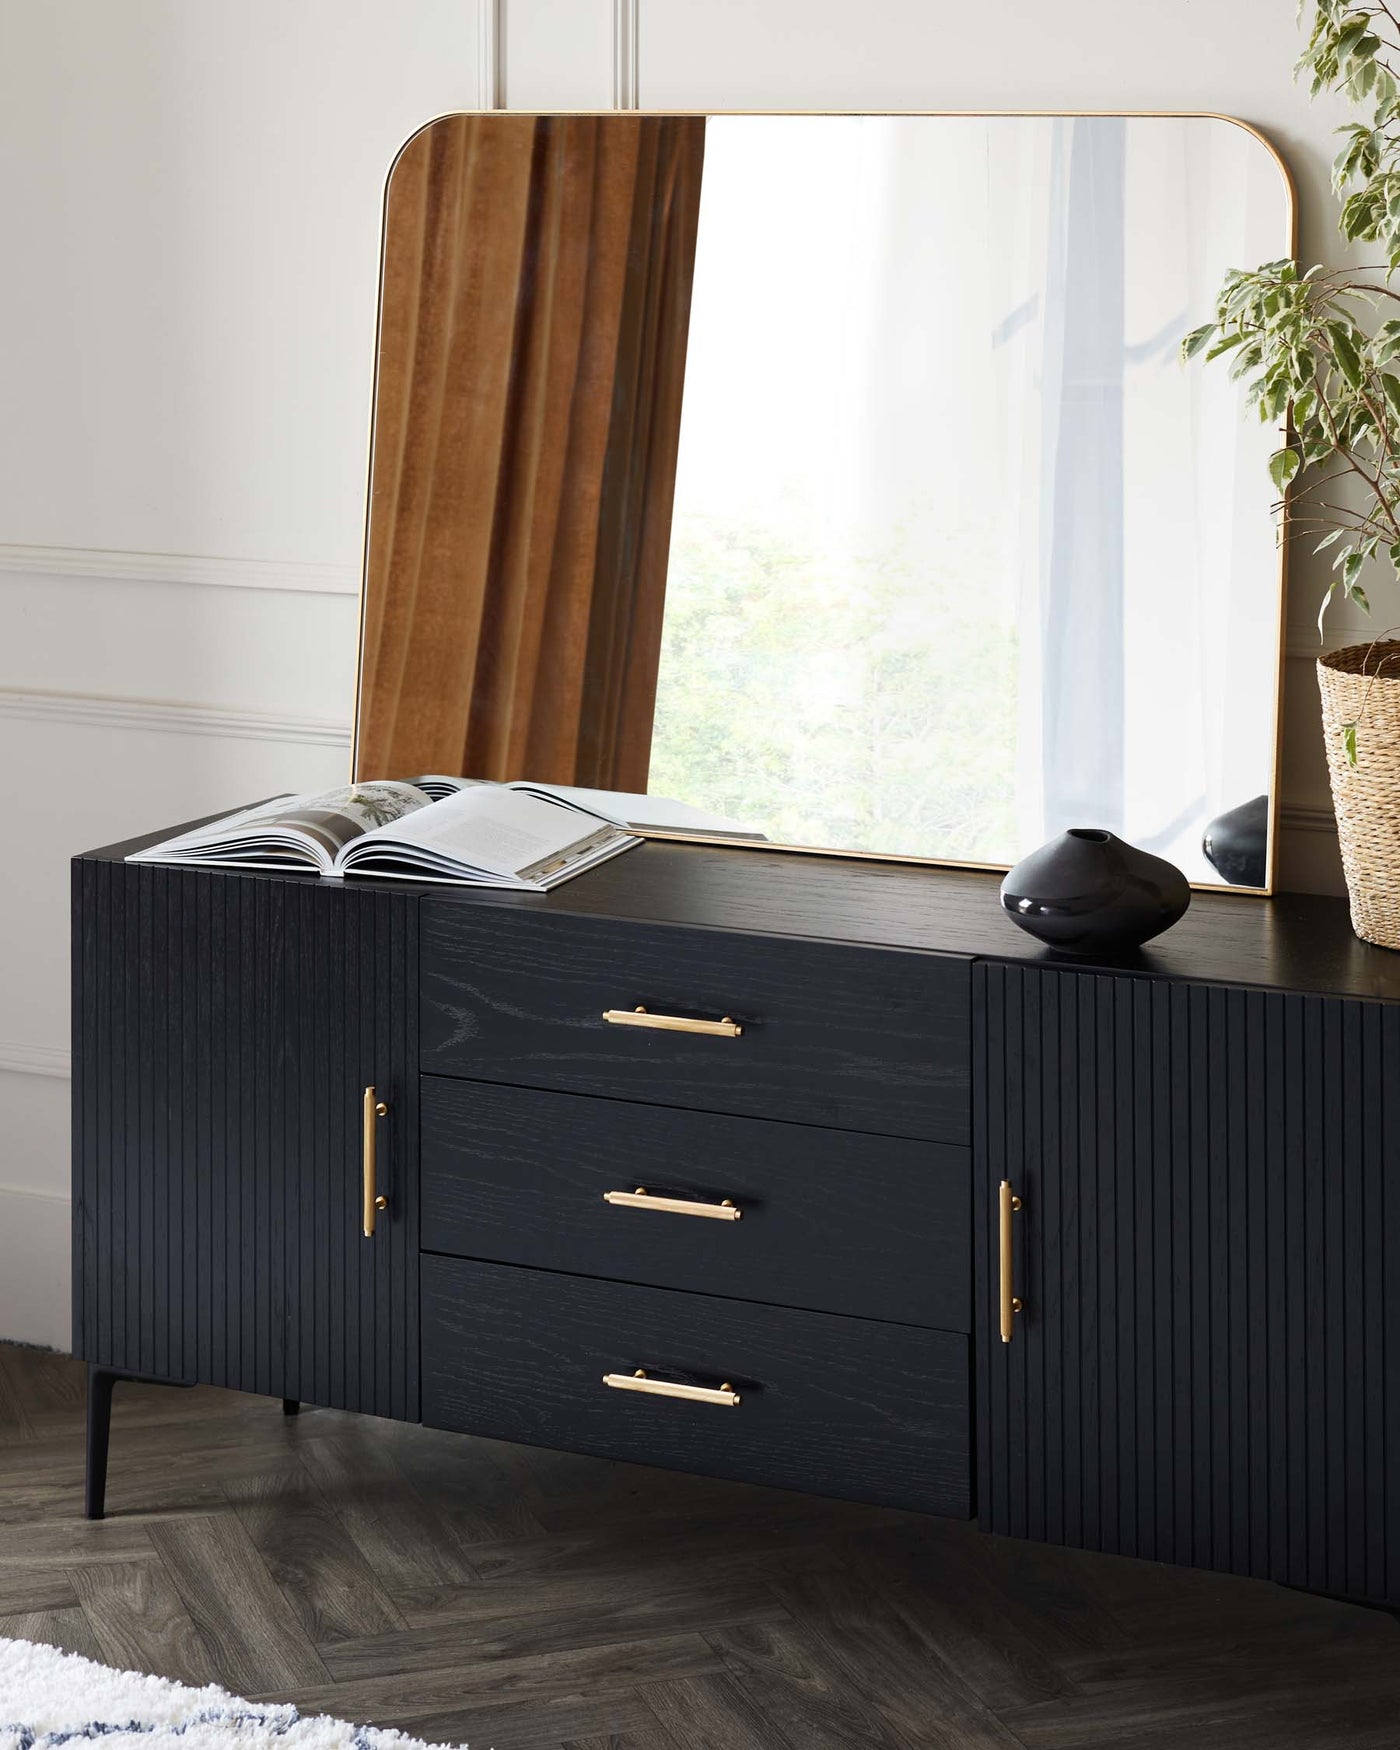 A contemporary black wooden sideboard with ribbed front panels and brass handles, paired with a large rectangular mirror featuring a rounded top and brass-coloured frame. The sideboard has three drawers with brass pull handles and stands on slender tapered legs. A decoratively placed open book, a small black vase, and a woven basket with greenery are arranged to accent the piece.